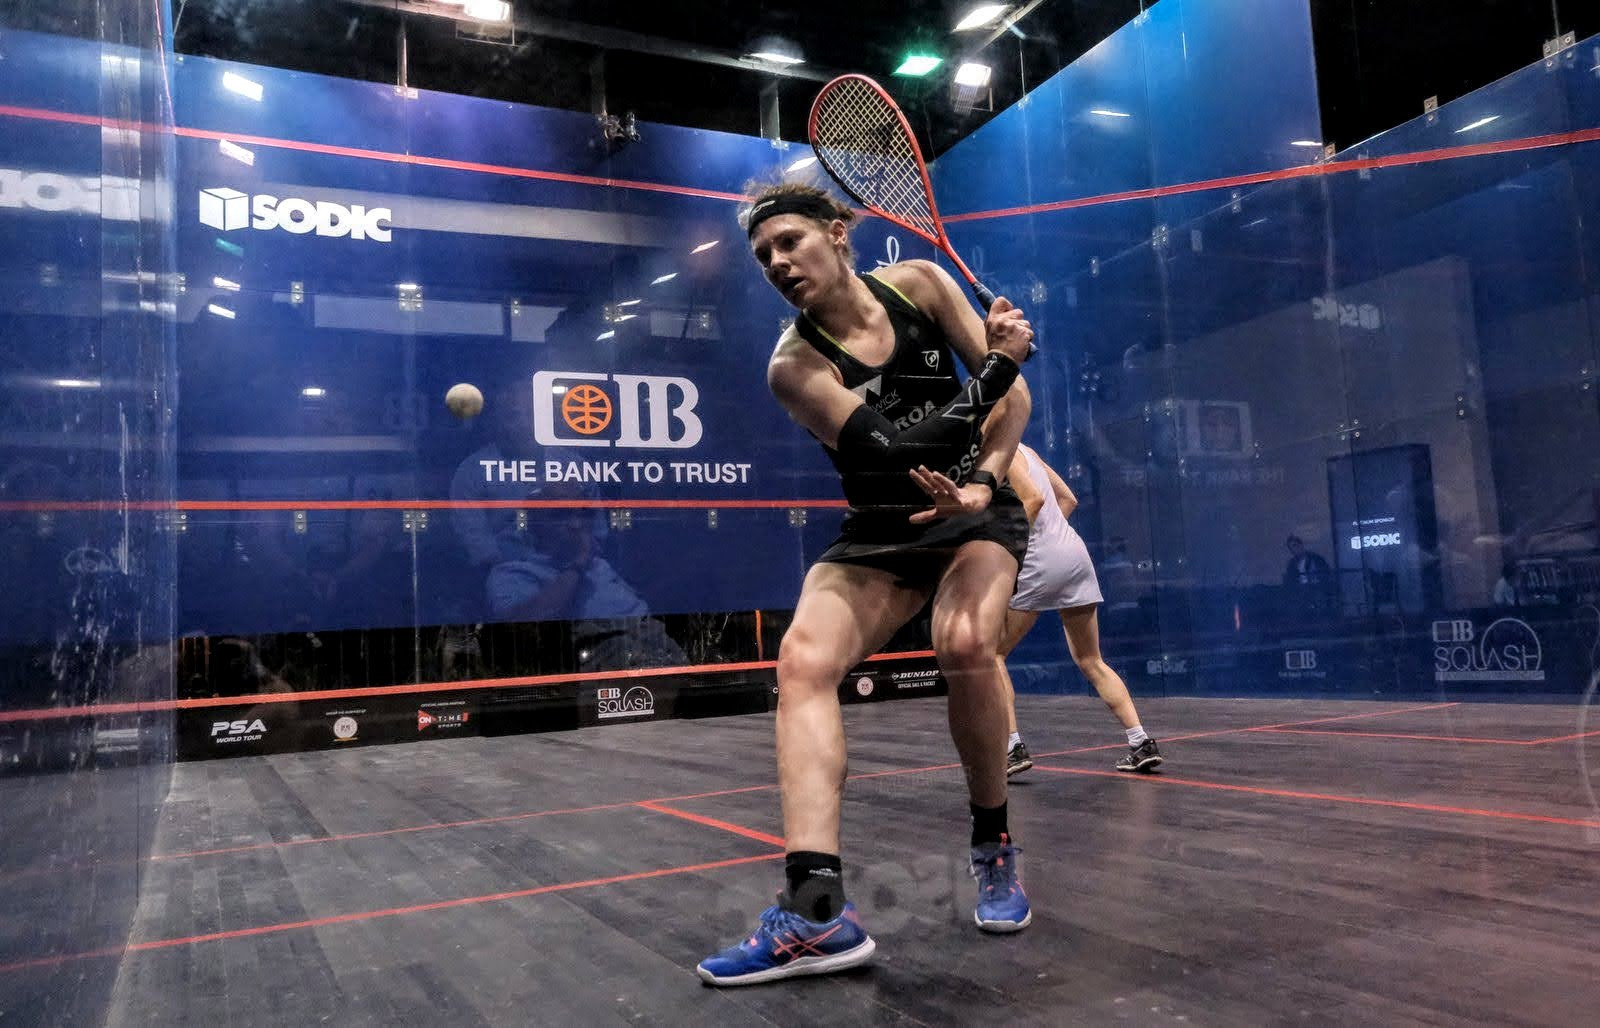 Perry survives scare with five-game triumph to reach World Squash Championships quarter-finals